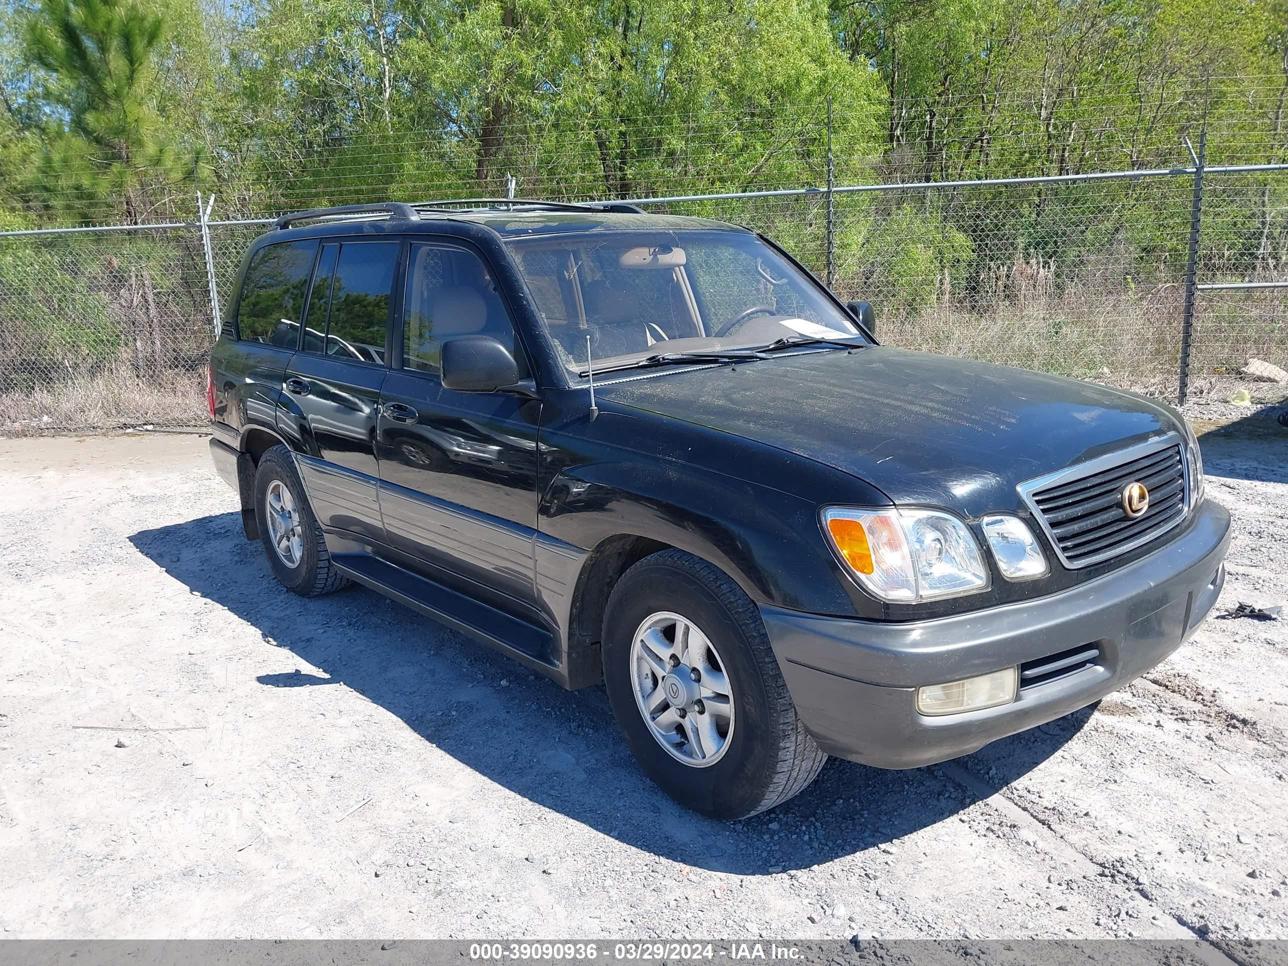 vin: JT6HT00W3X0037222 JT6HT00W3X0037222 1999 lexus lx 4700 for Sale in 39562, 8209 Old Stage Rd, Moss Point, Mississippi, USA